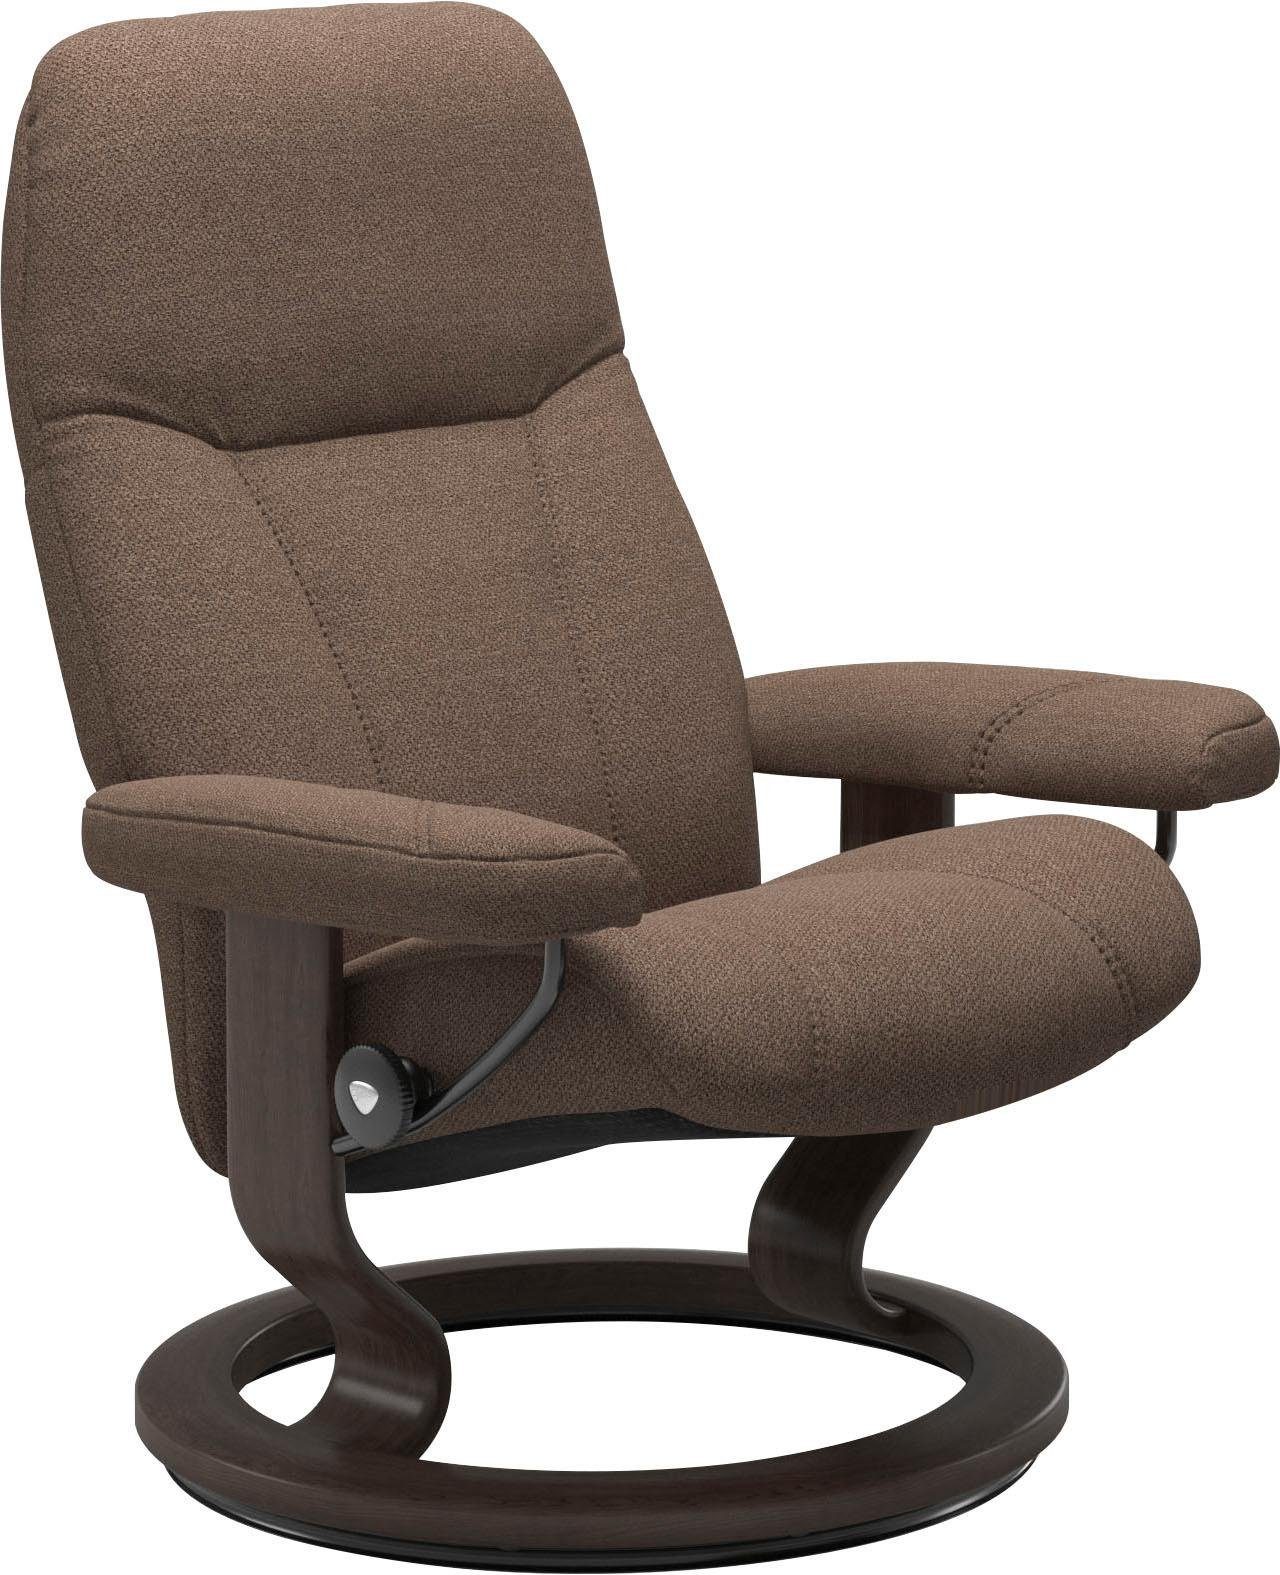 Classic Consul, Gestell Base, mit Relaxsessel Größe Stressless® S, Wenge